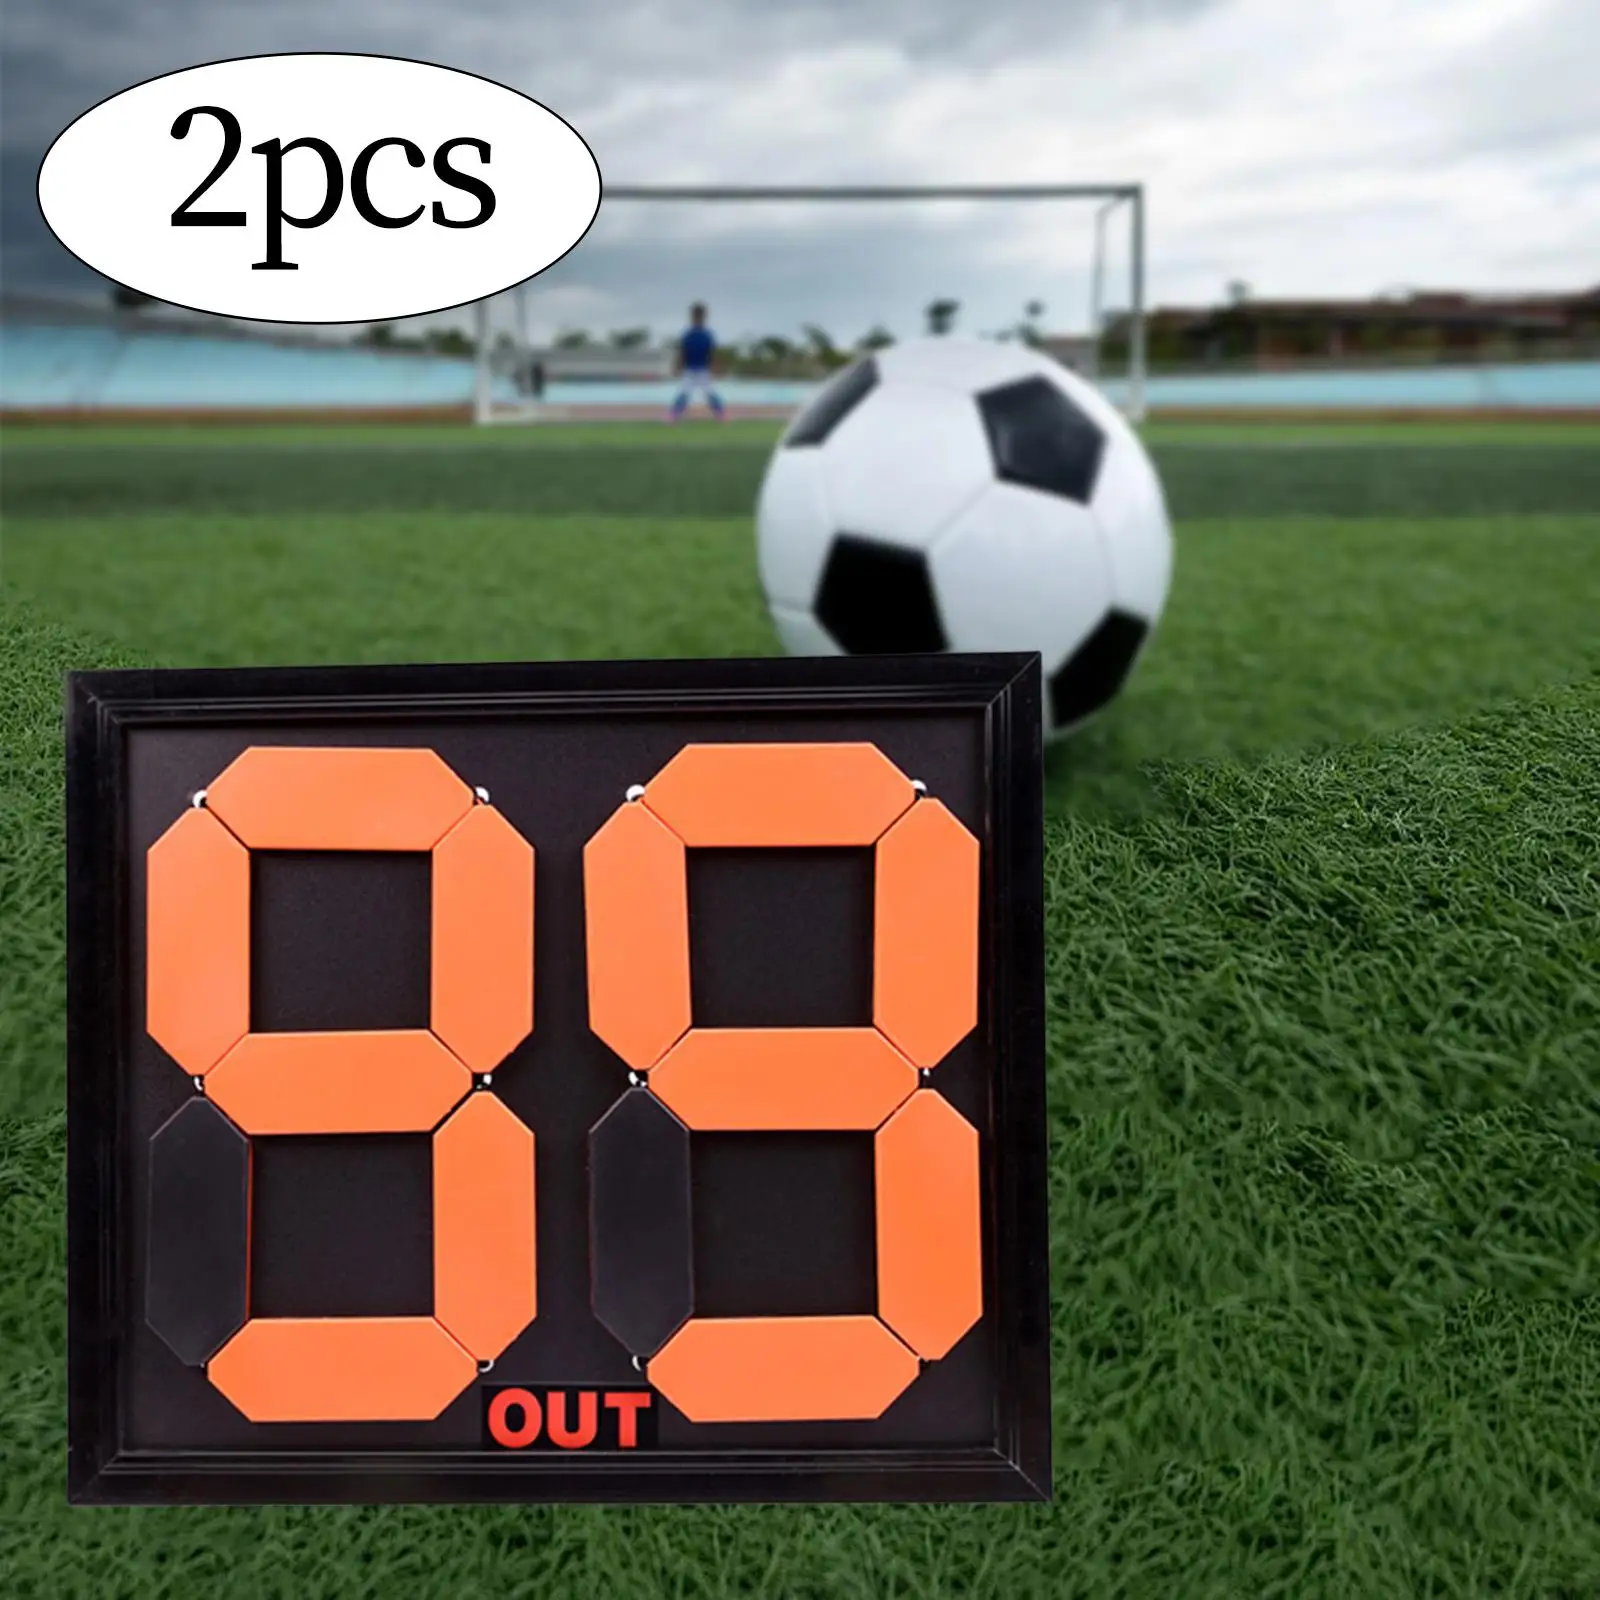 2Pcs Soccer Football Substitution Board Soccer Game Basketball Game Electronic Scoreboard